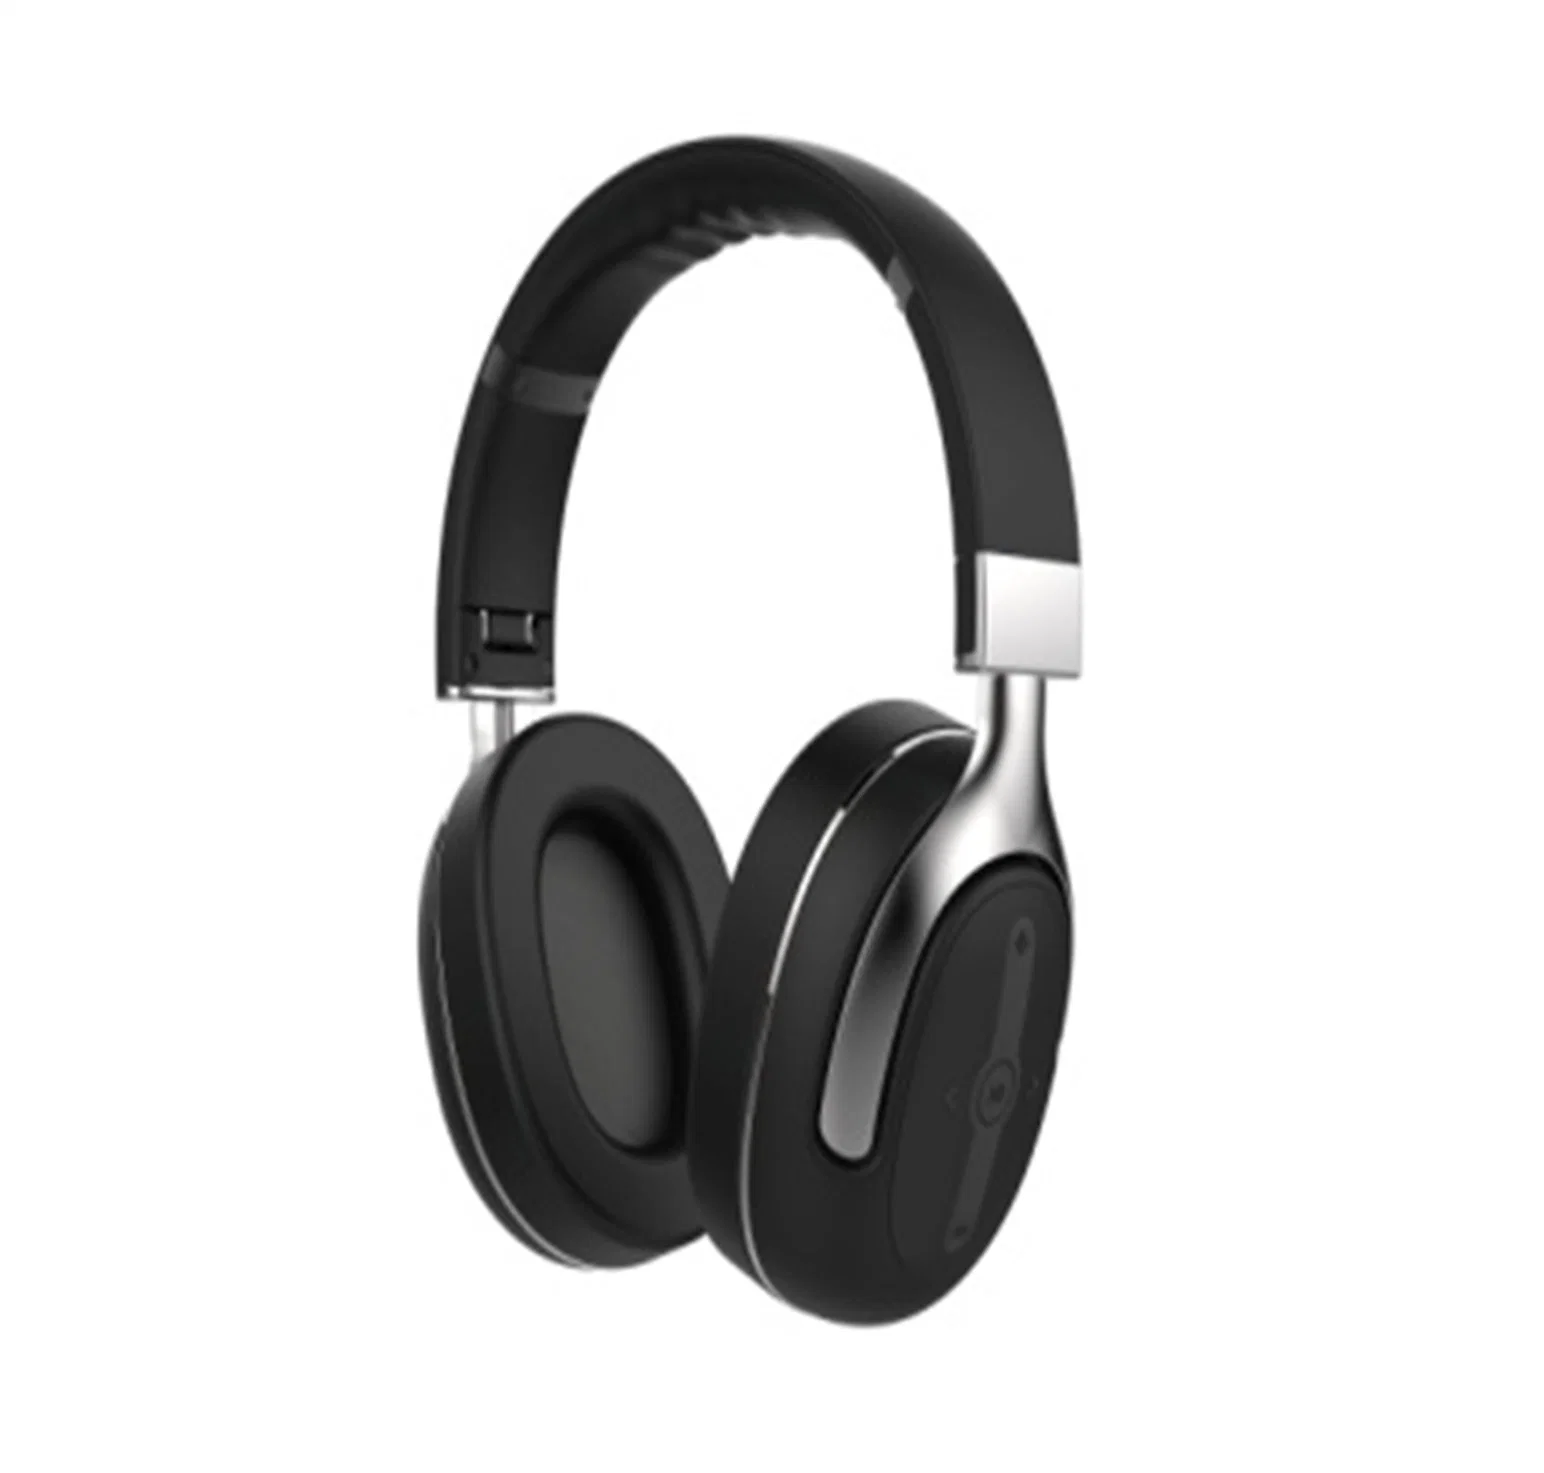 Bluetooth Anc Headphone Covered Ear Over-Ear Wired and Wireless in One